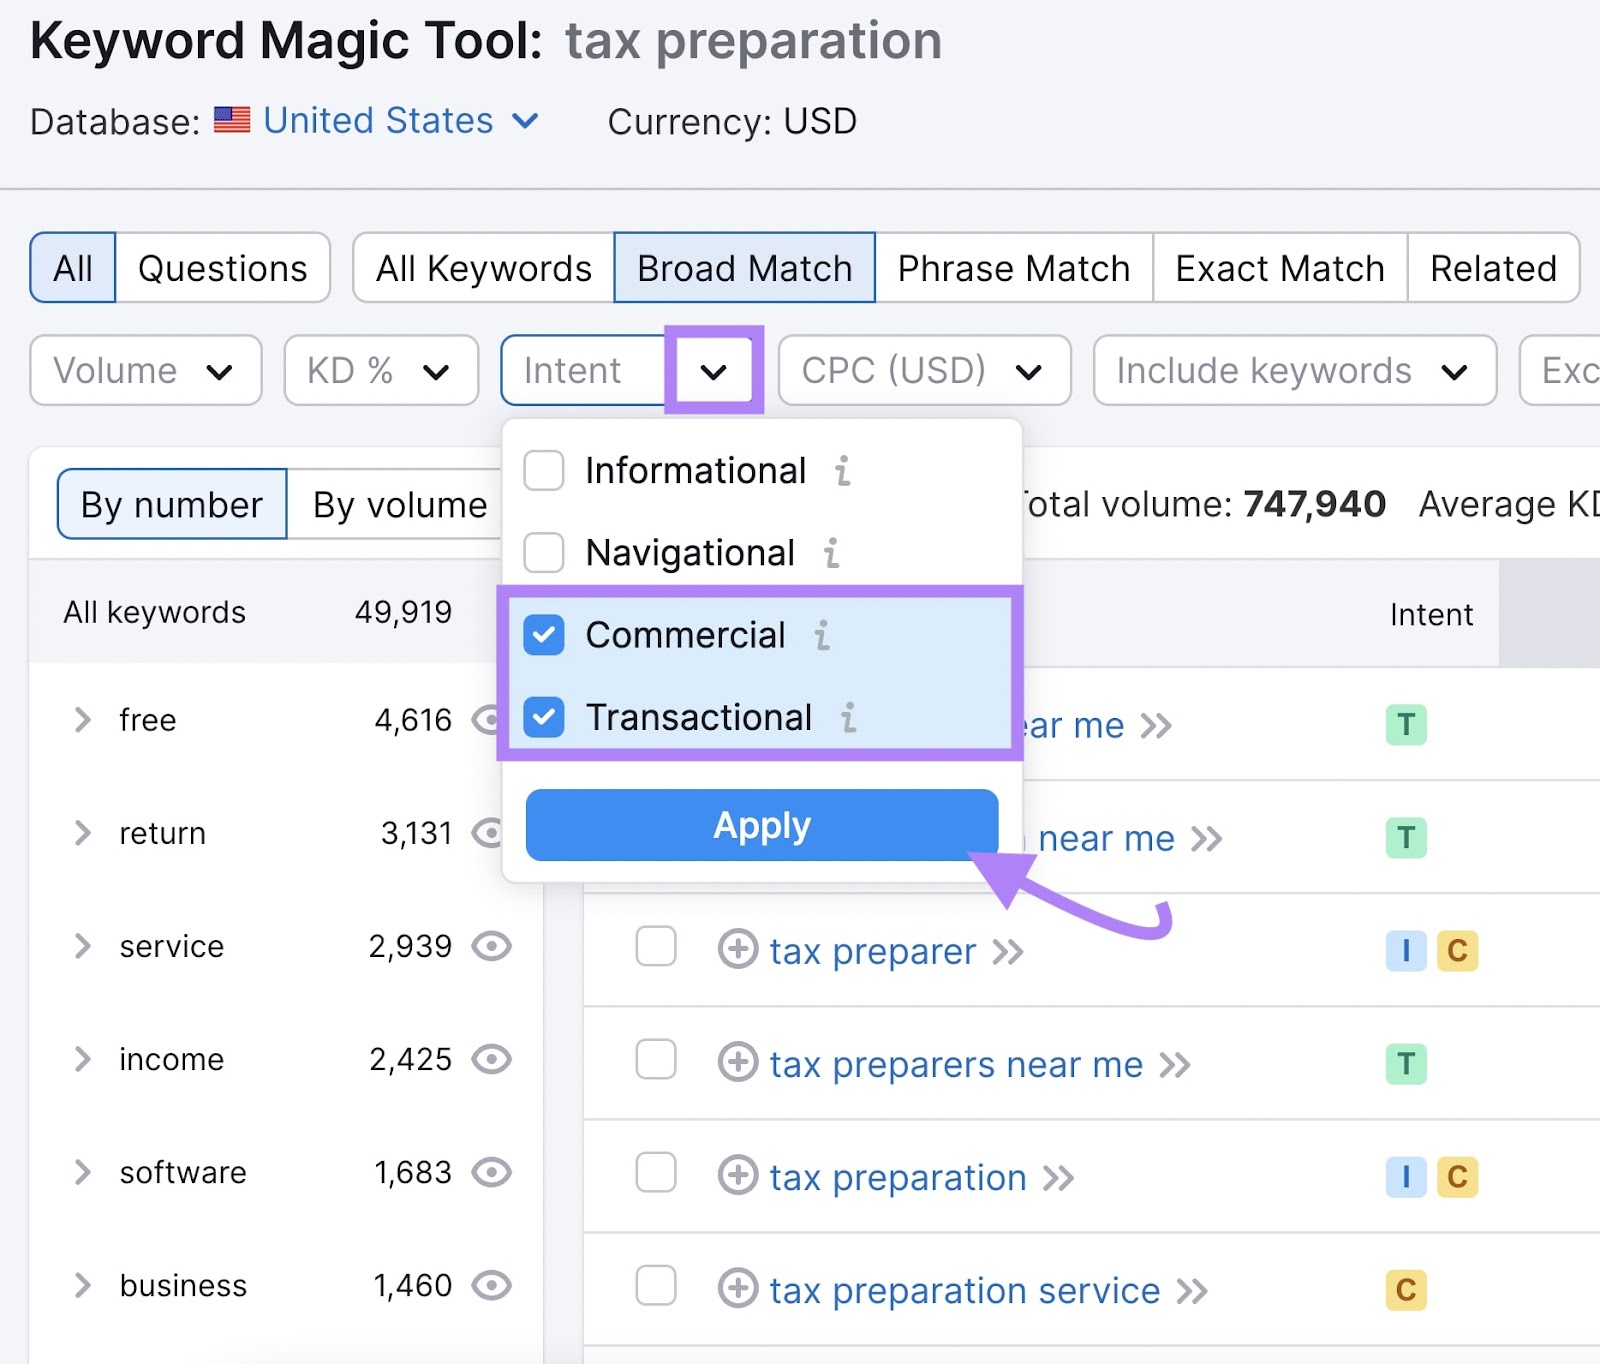 Using the Keyword Magic tool to highlight keywords related to 'tax preparation' with commercial and transactional intent